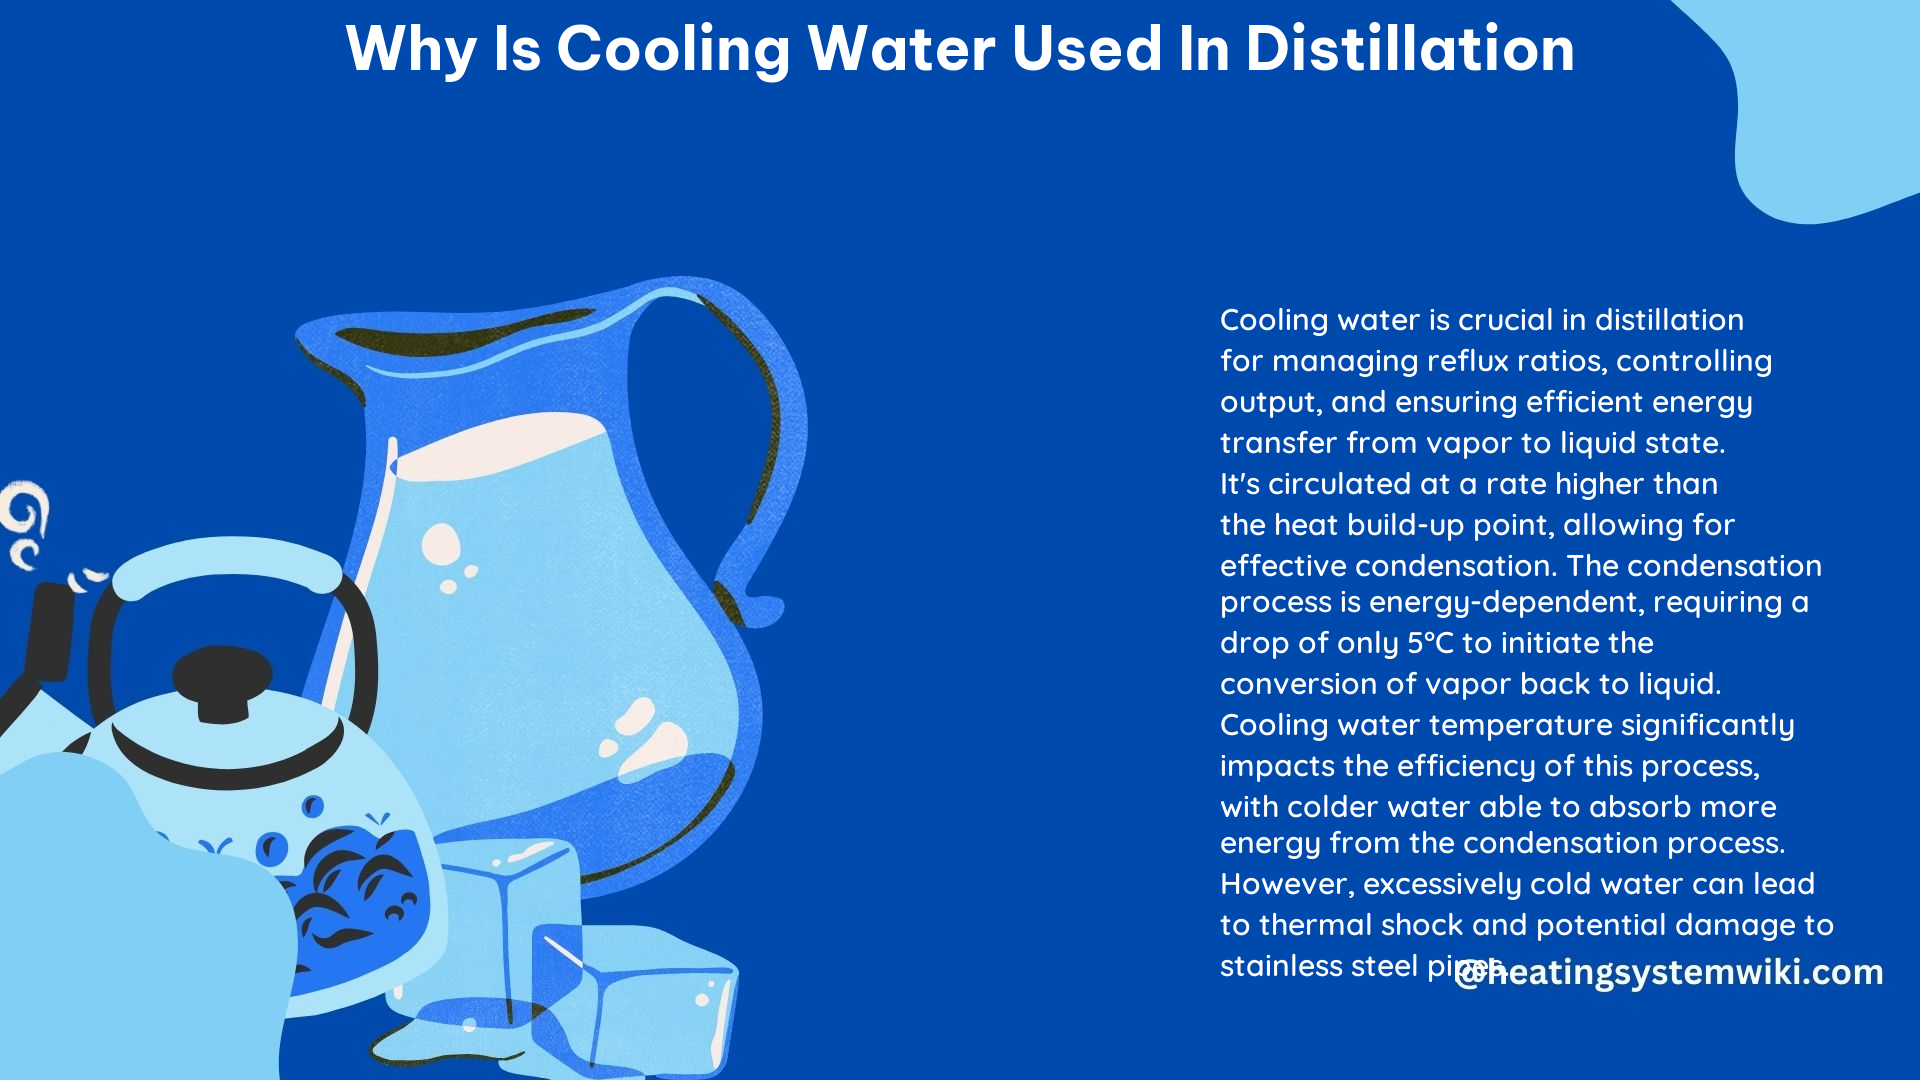 Why Is Cooling Water Used in Distillation